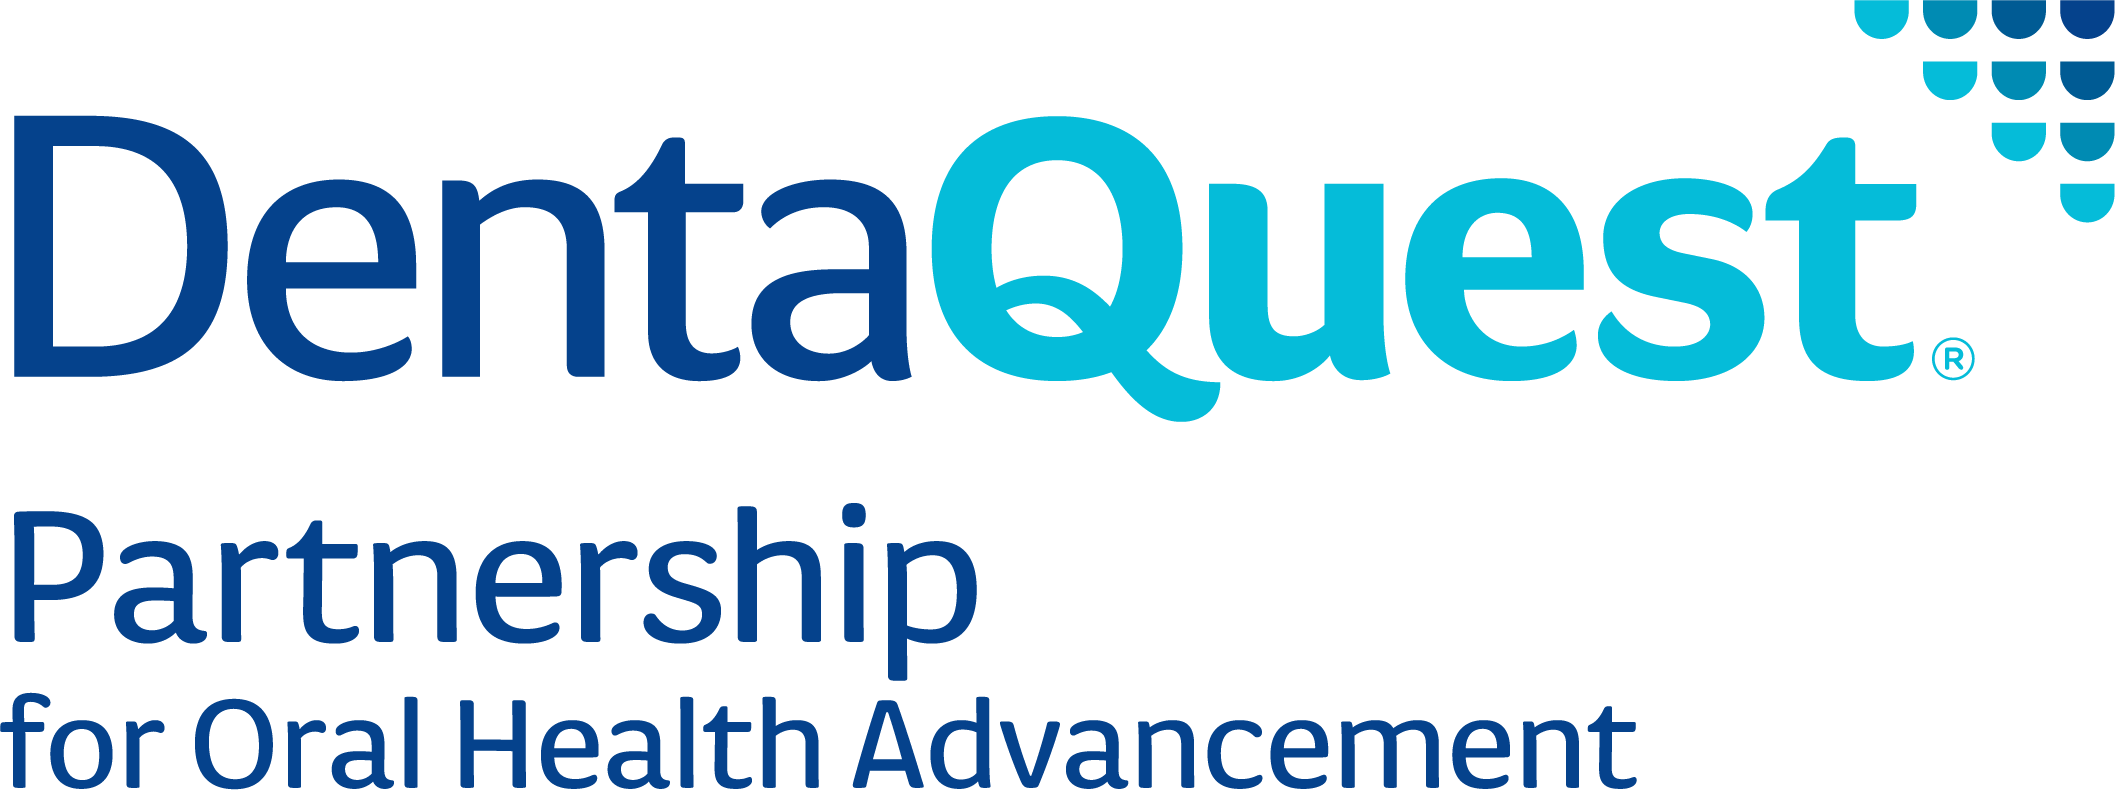 DentaQuest Partnership for oral health advancement